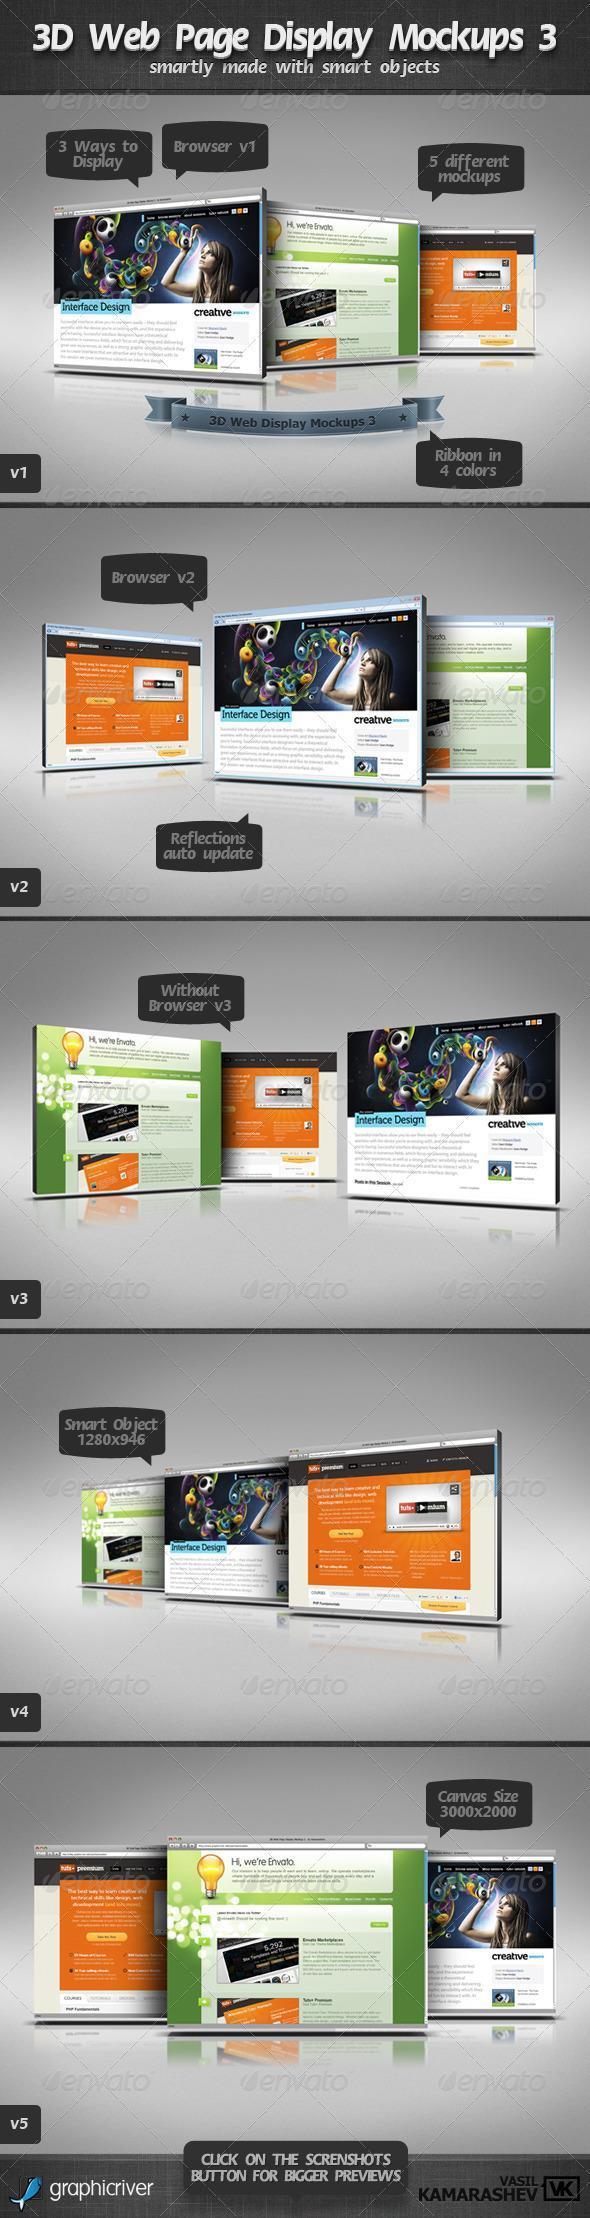 Web Page Browser Preview PSD Mockup